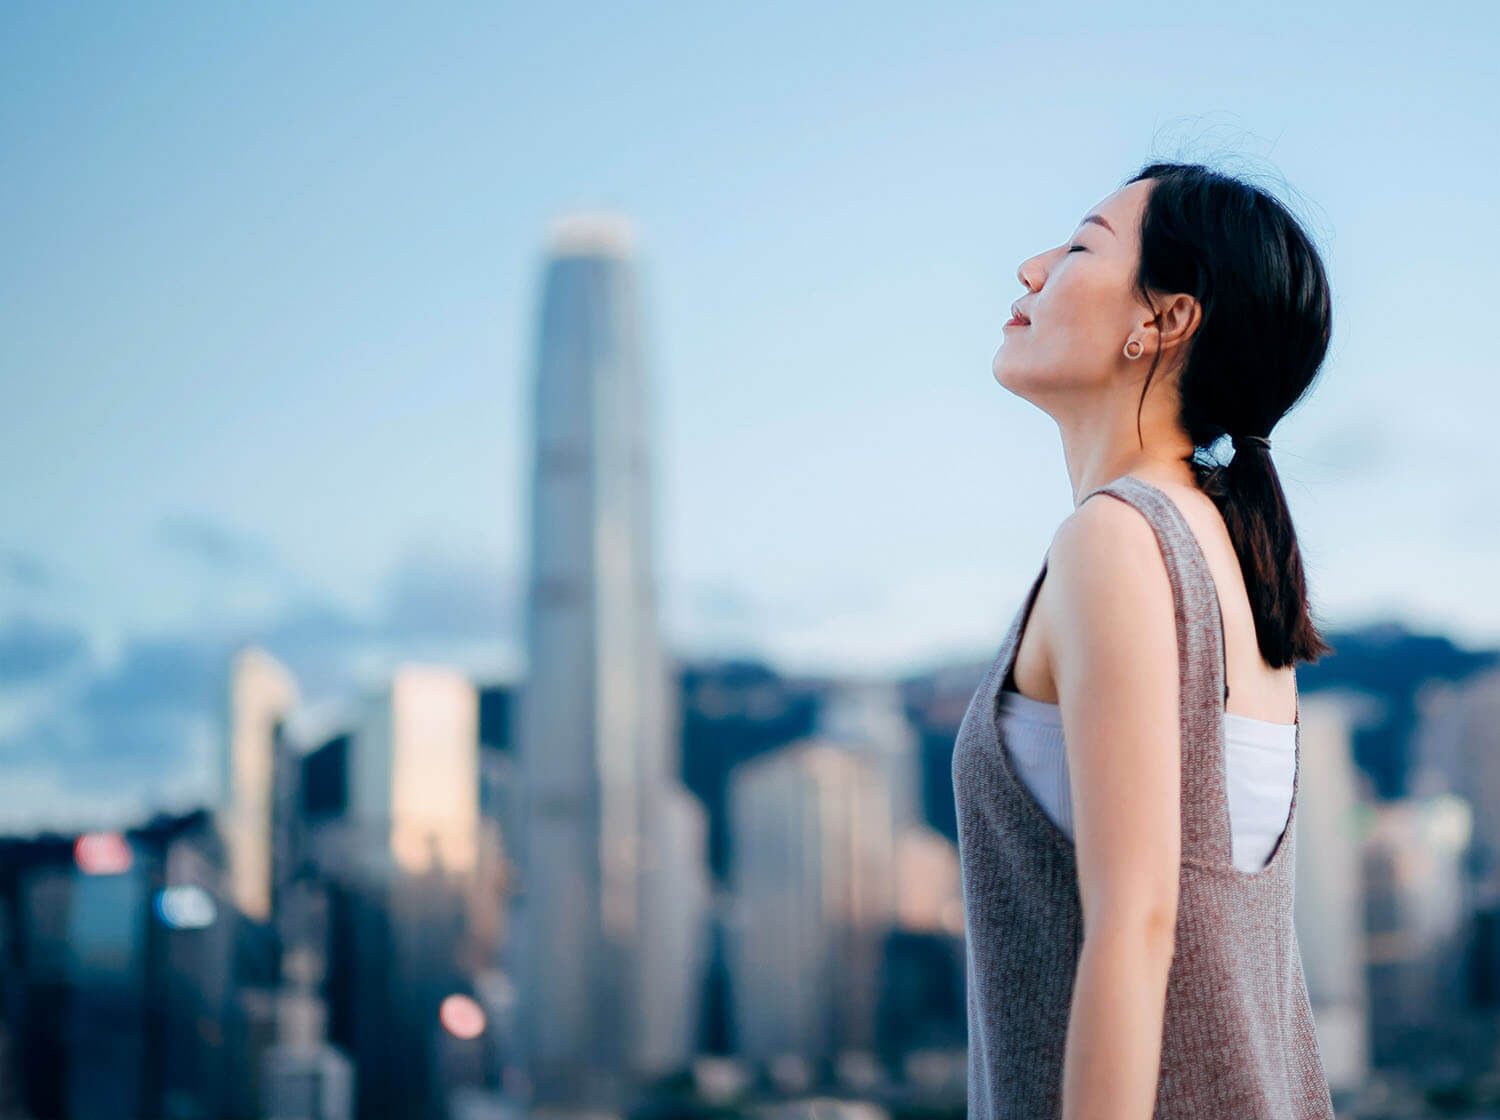 Against the backdrop of a city panorama, a woman raises her head with her eyes closed.